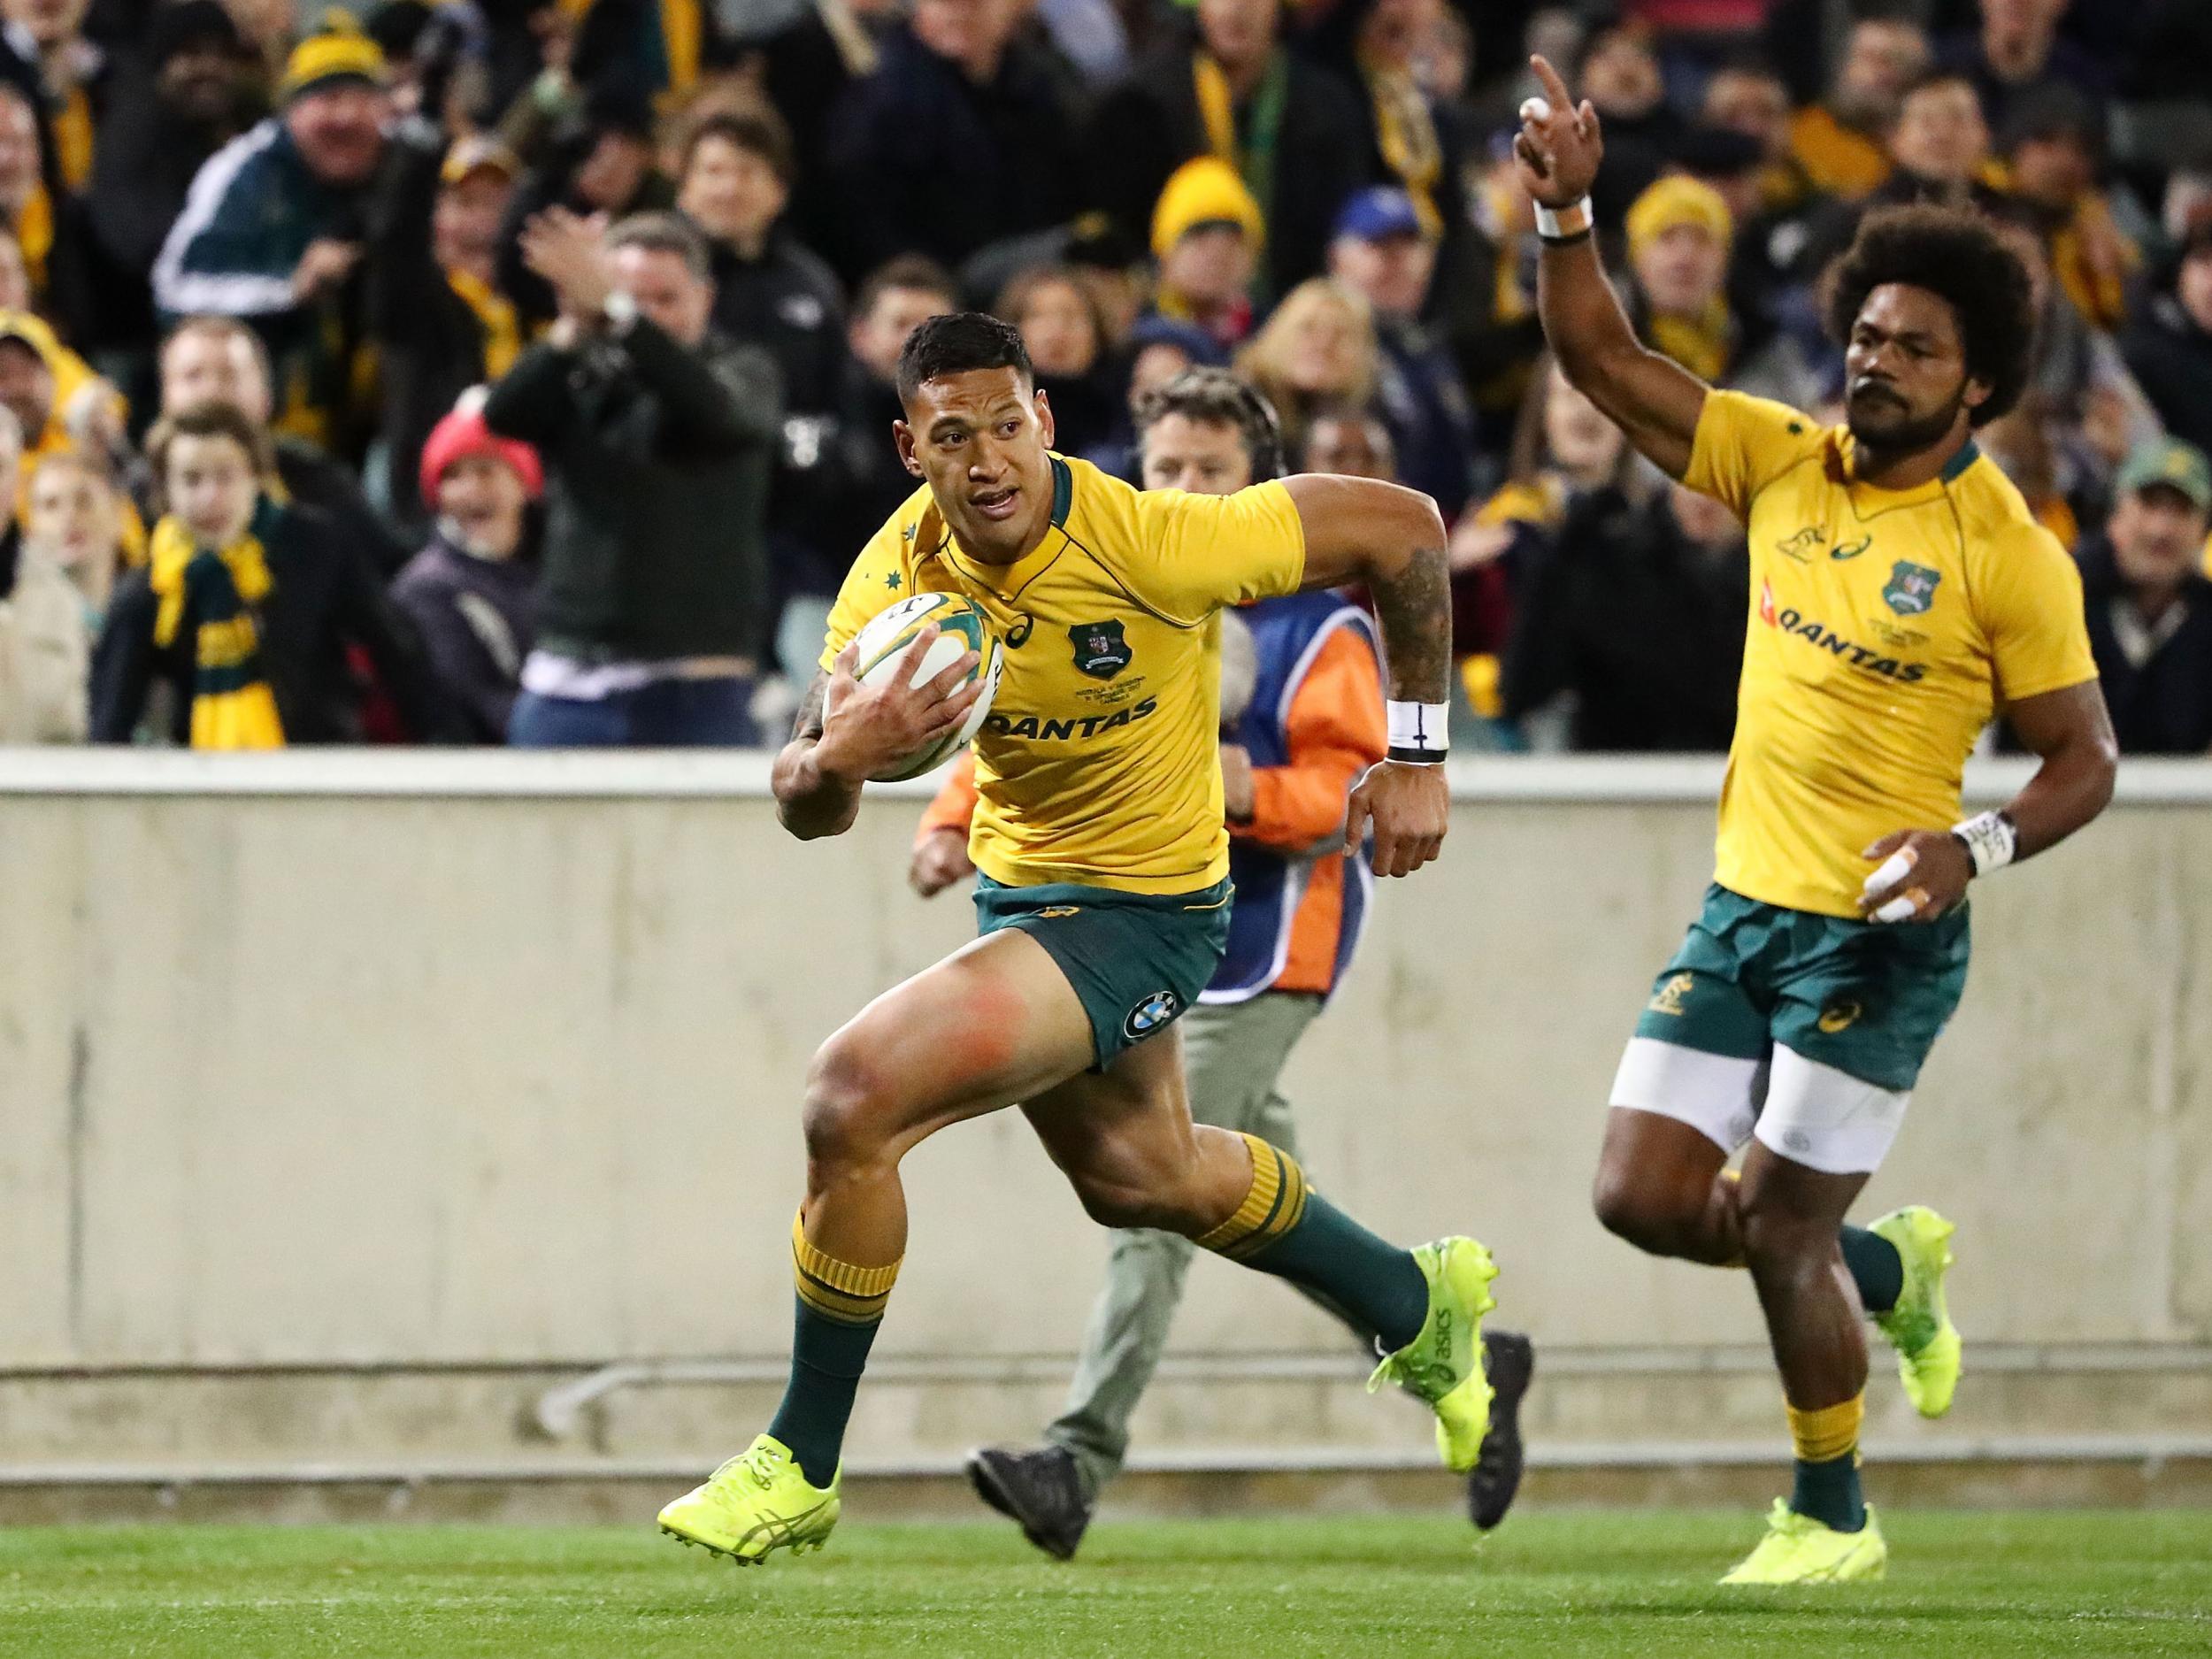 Israel Folau scored either side of half-time